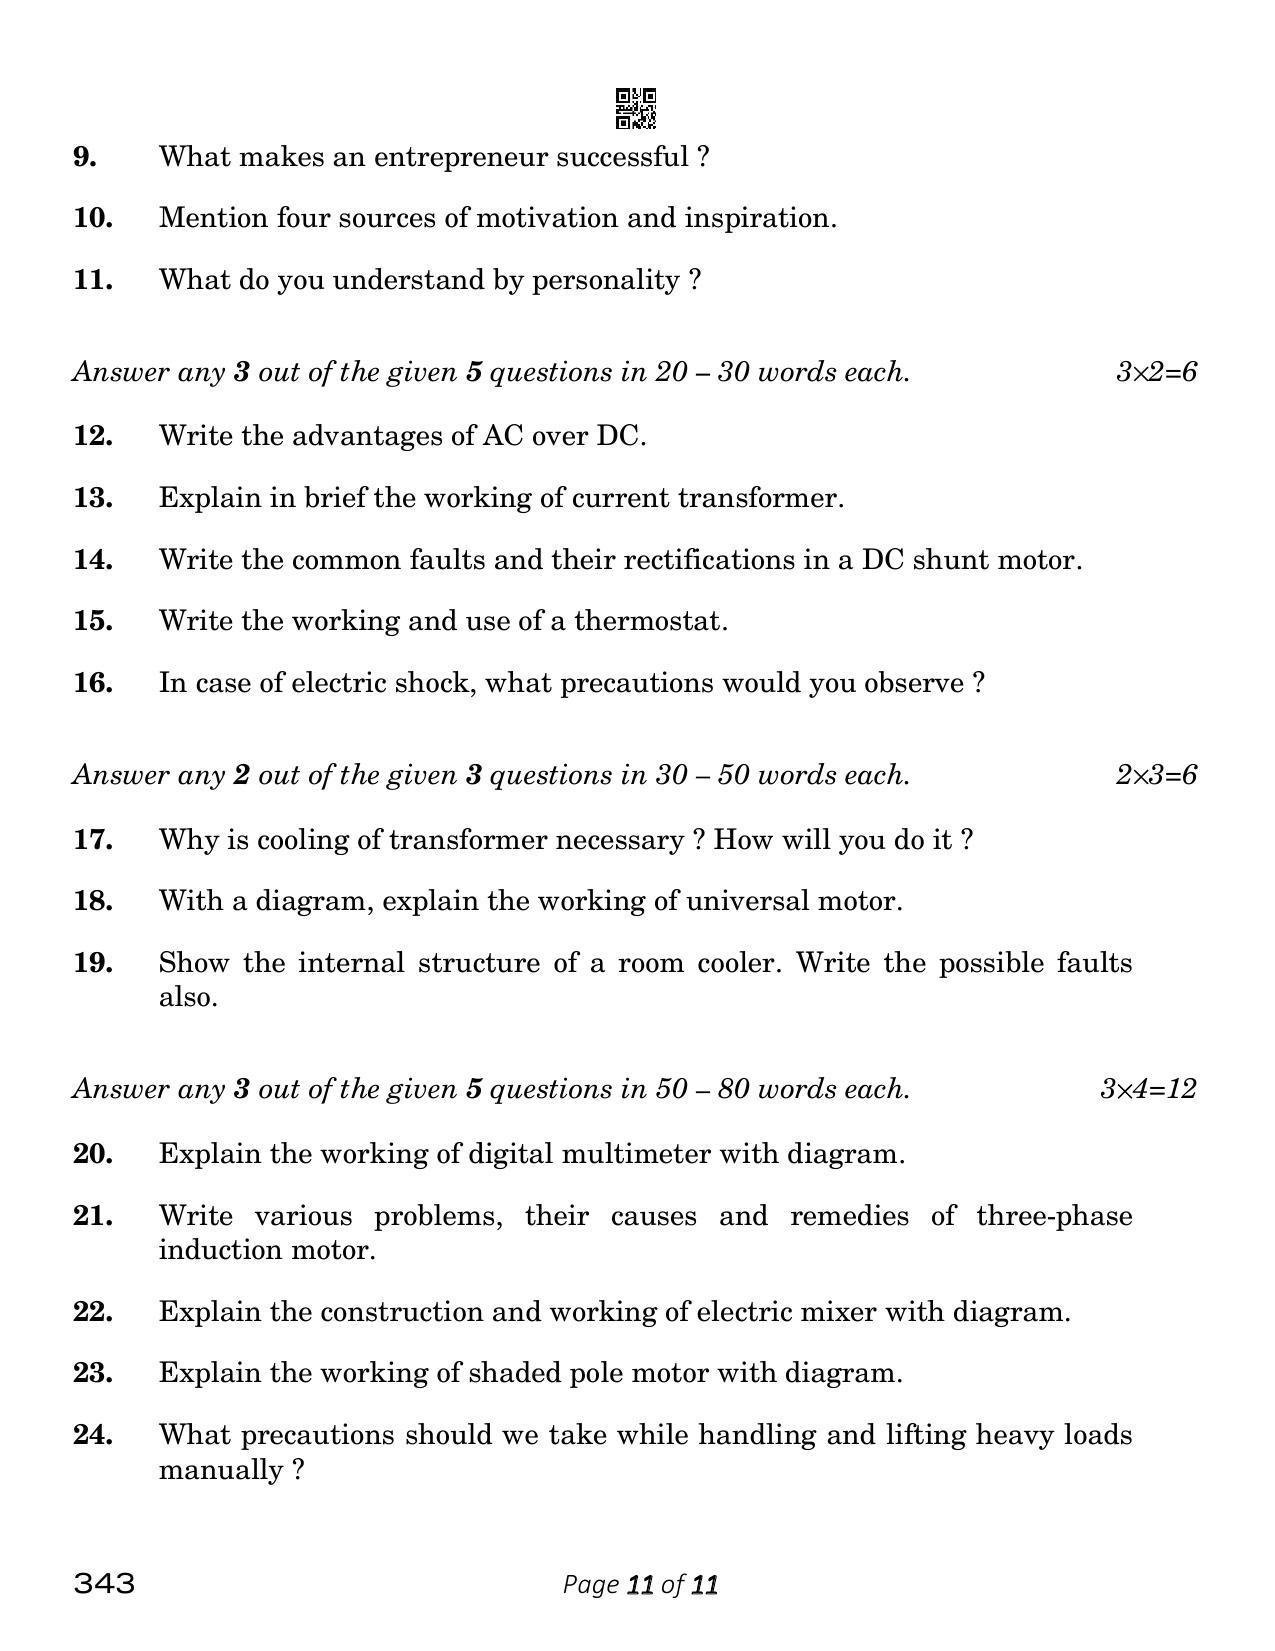 CBSE Class 12 Electrical Technology (Compartment) 2023 Question Paper - Page 11